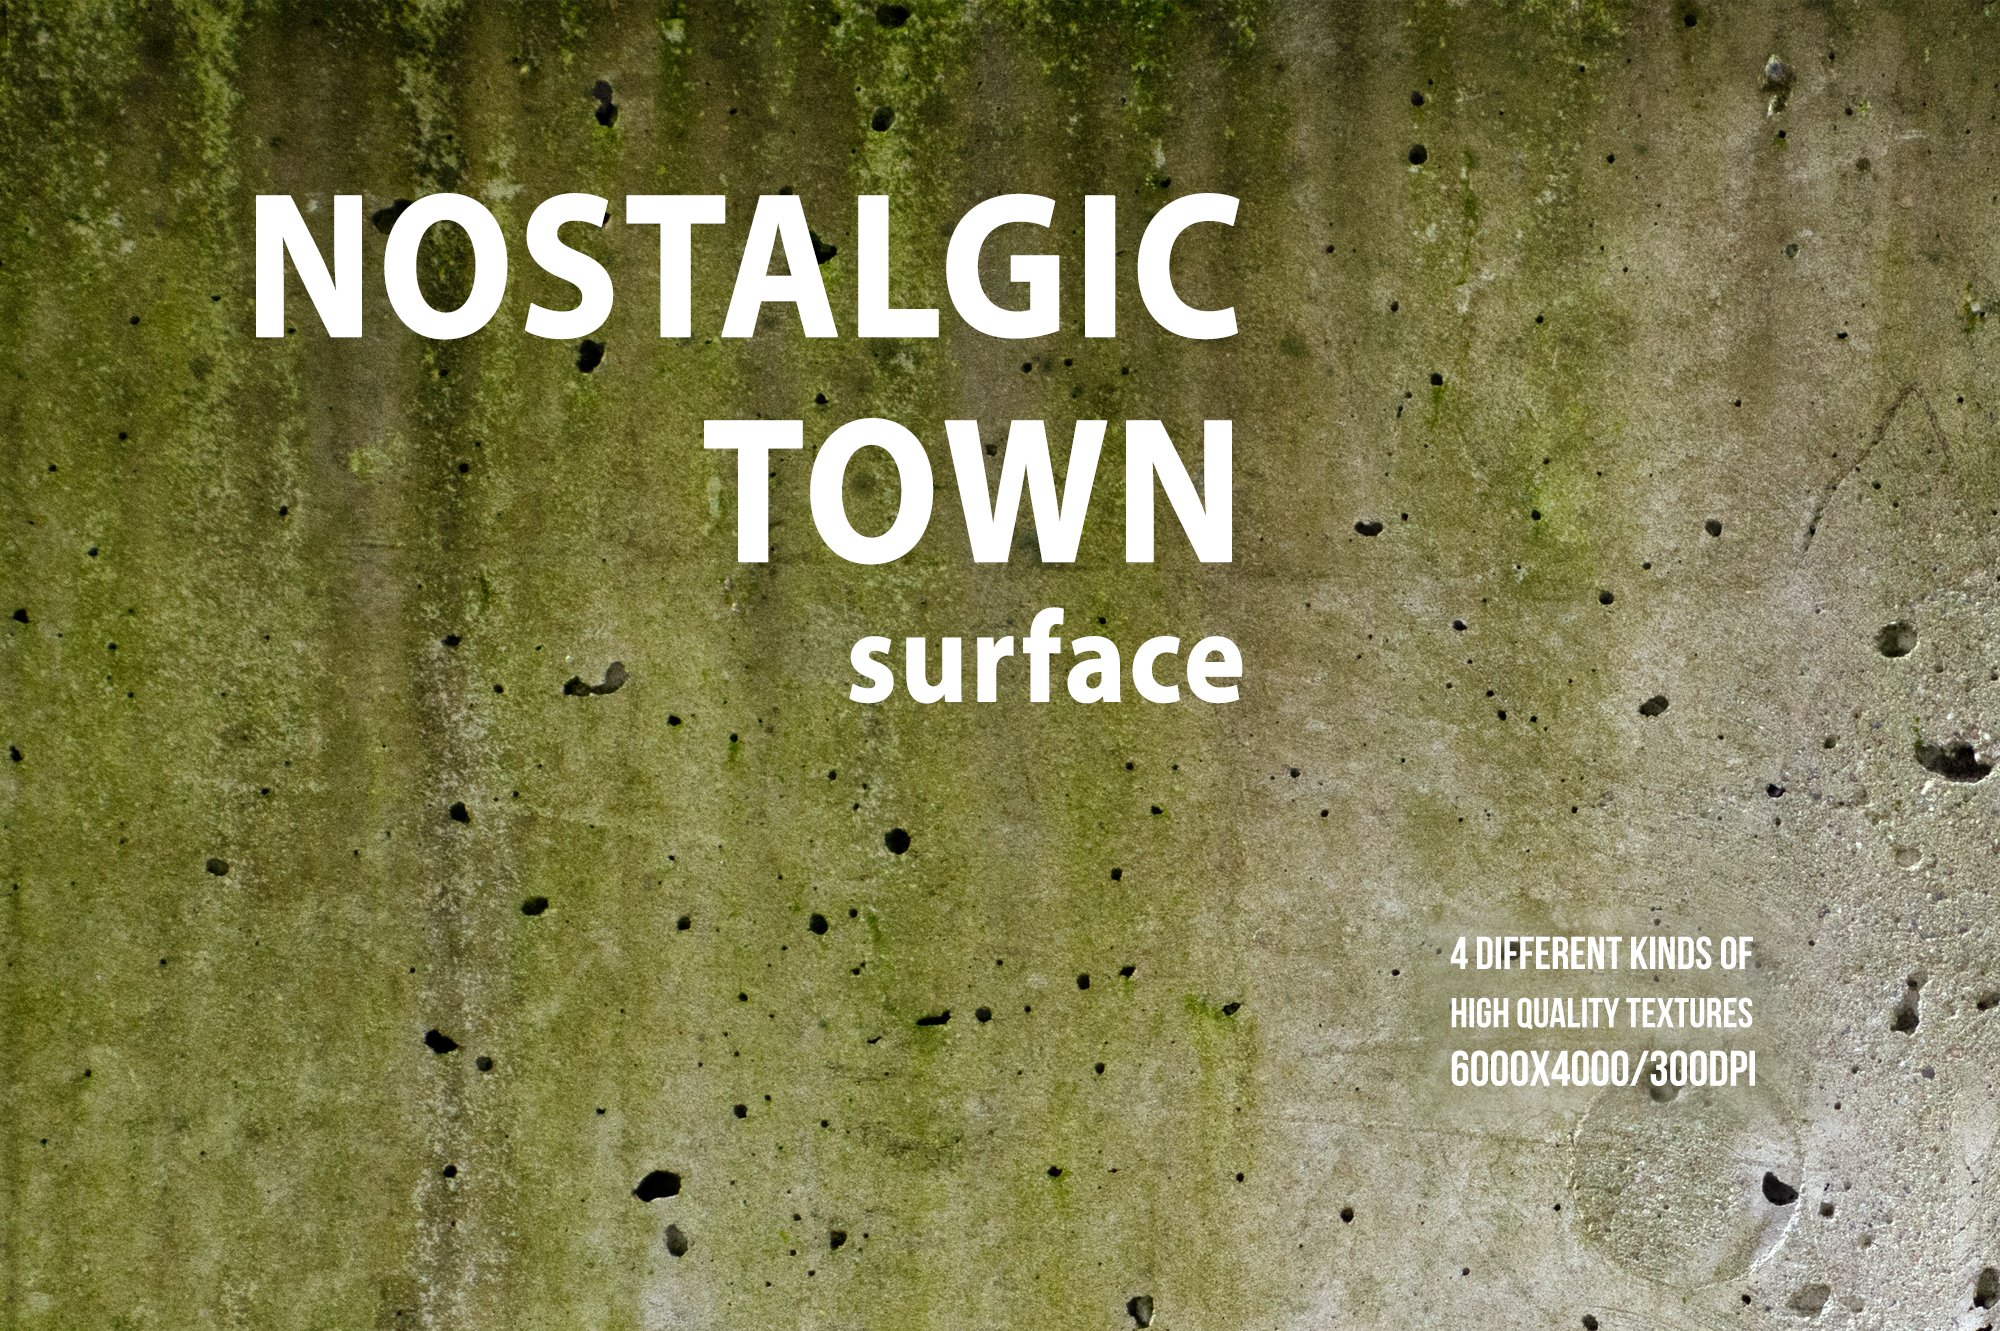 Nostalgic Town: Surface cover image.